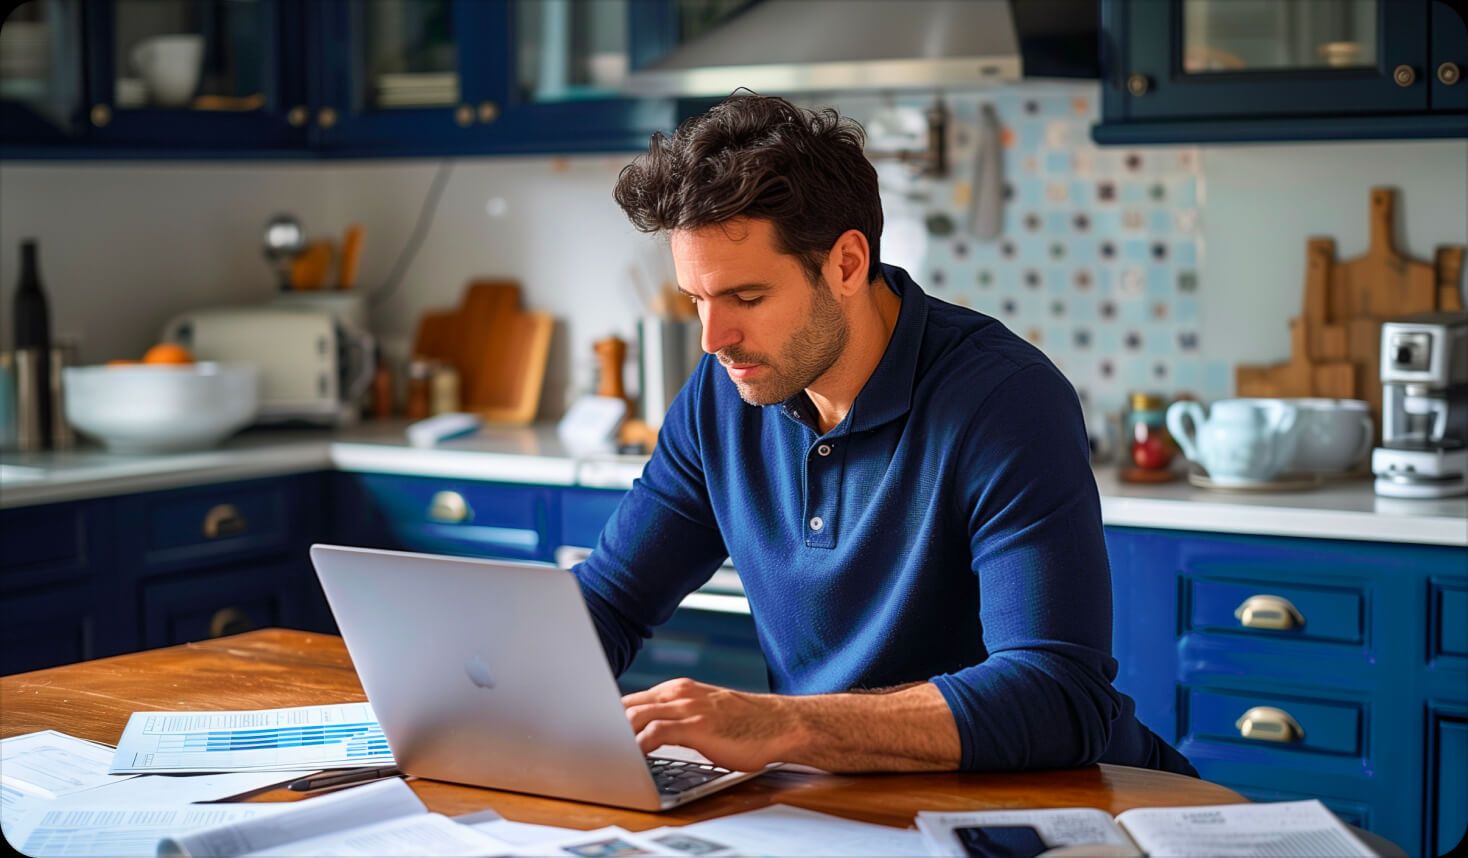 Person at a laptop working from home in a kitchen/dining room.